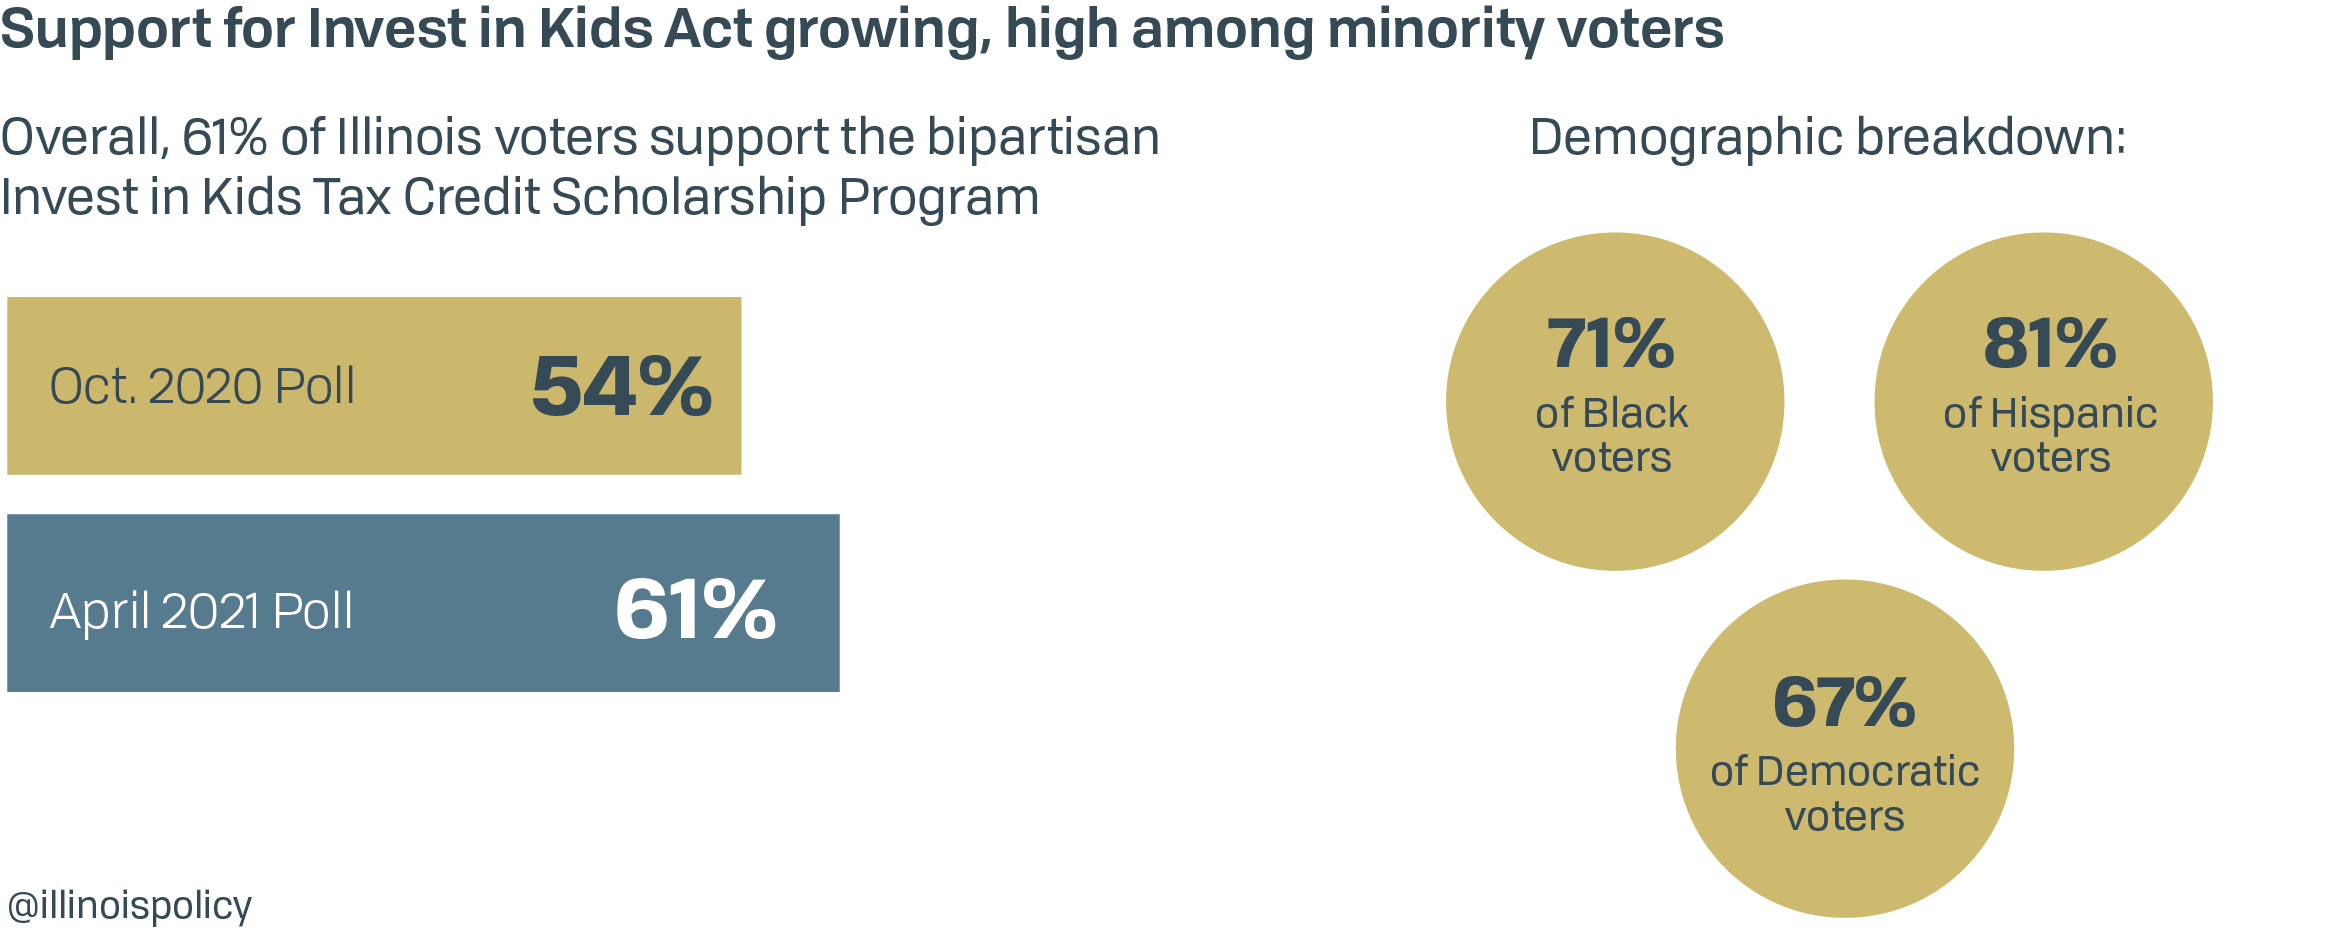 Support for Invest in Kids Act high, growing among minority voters